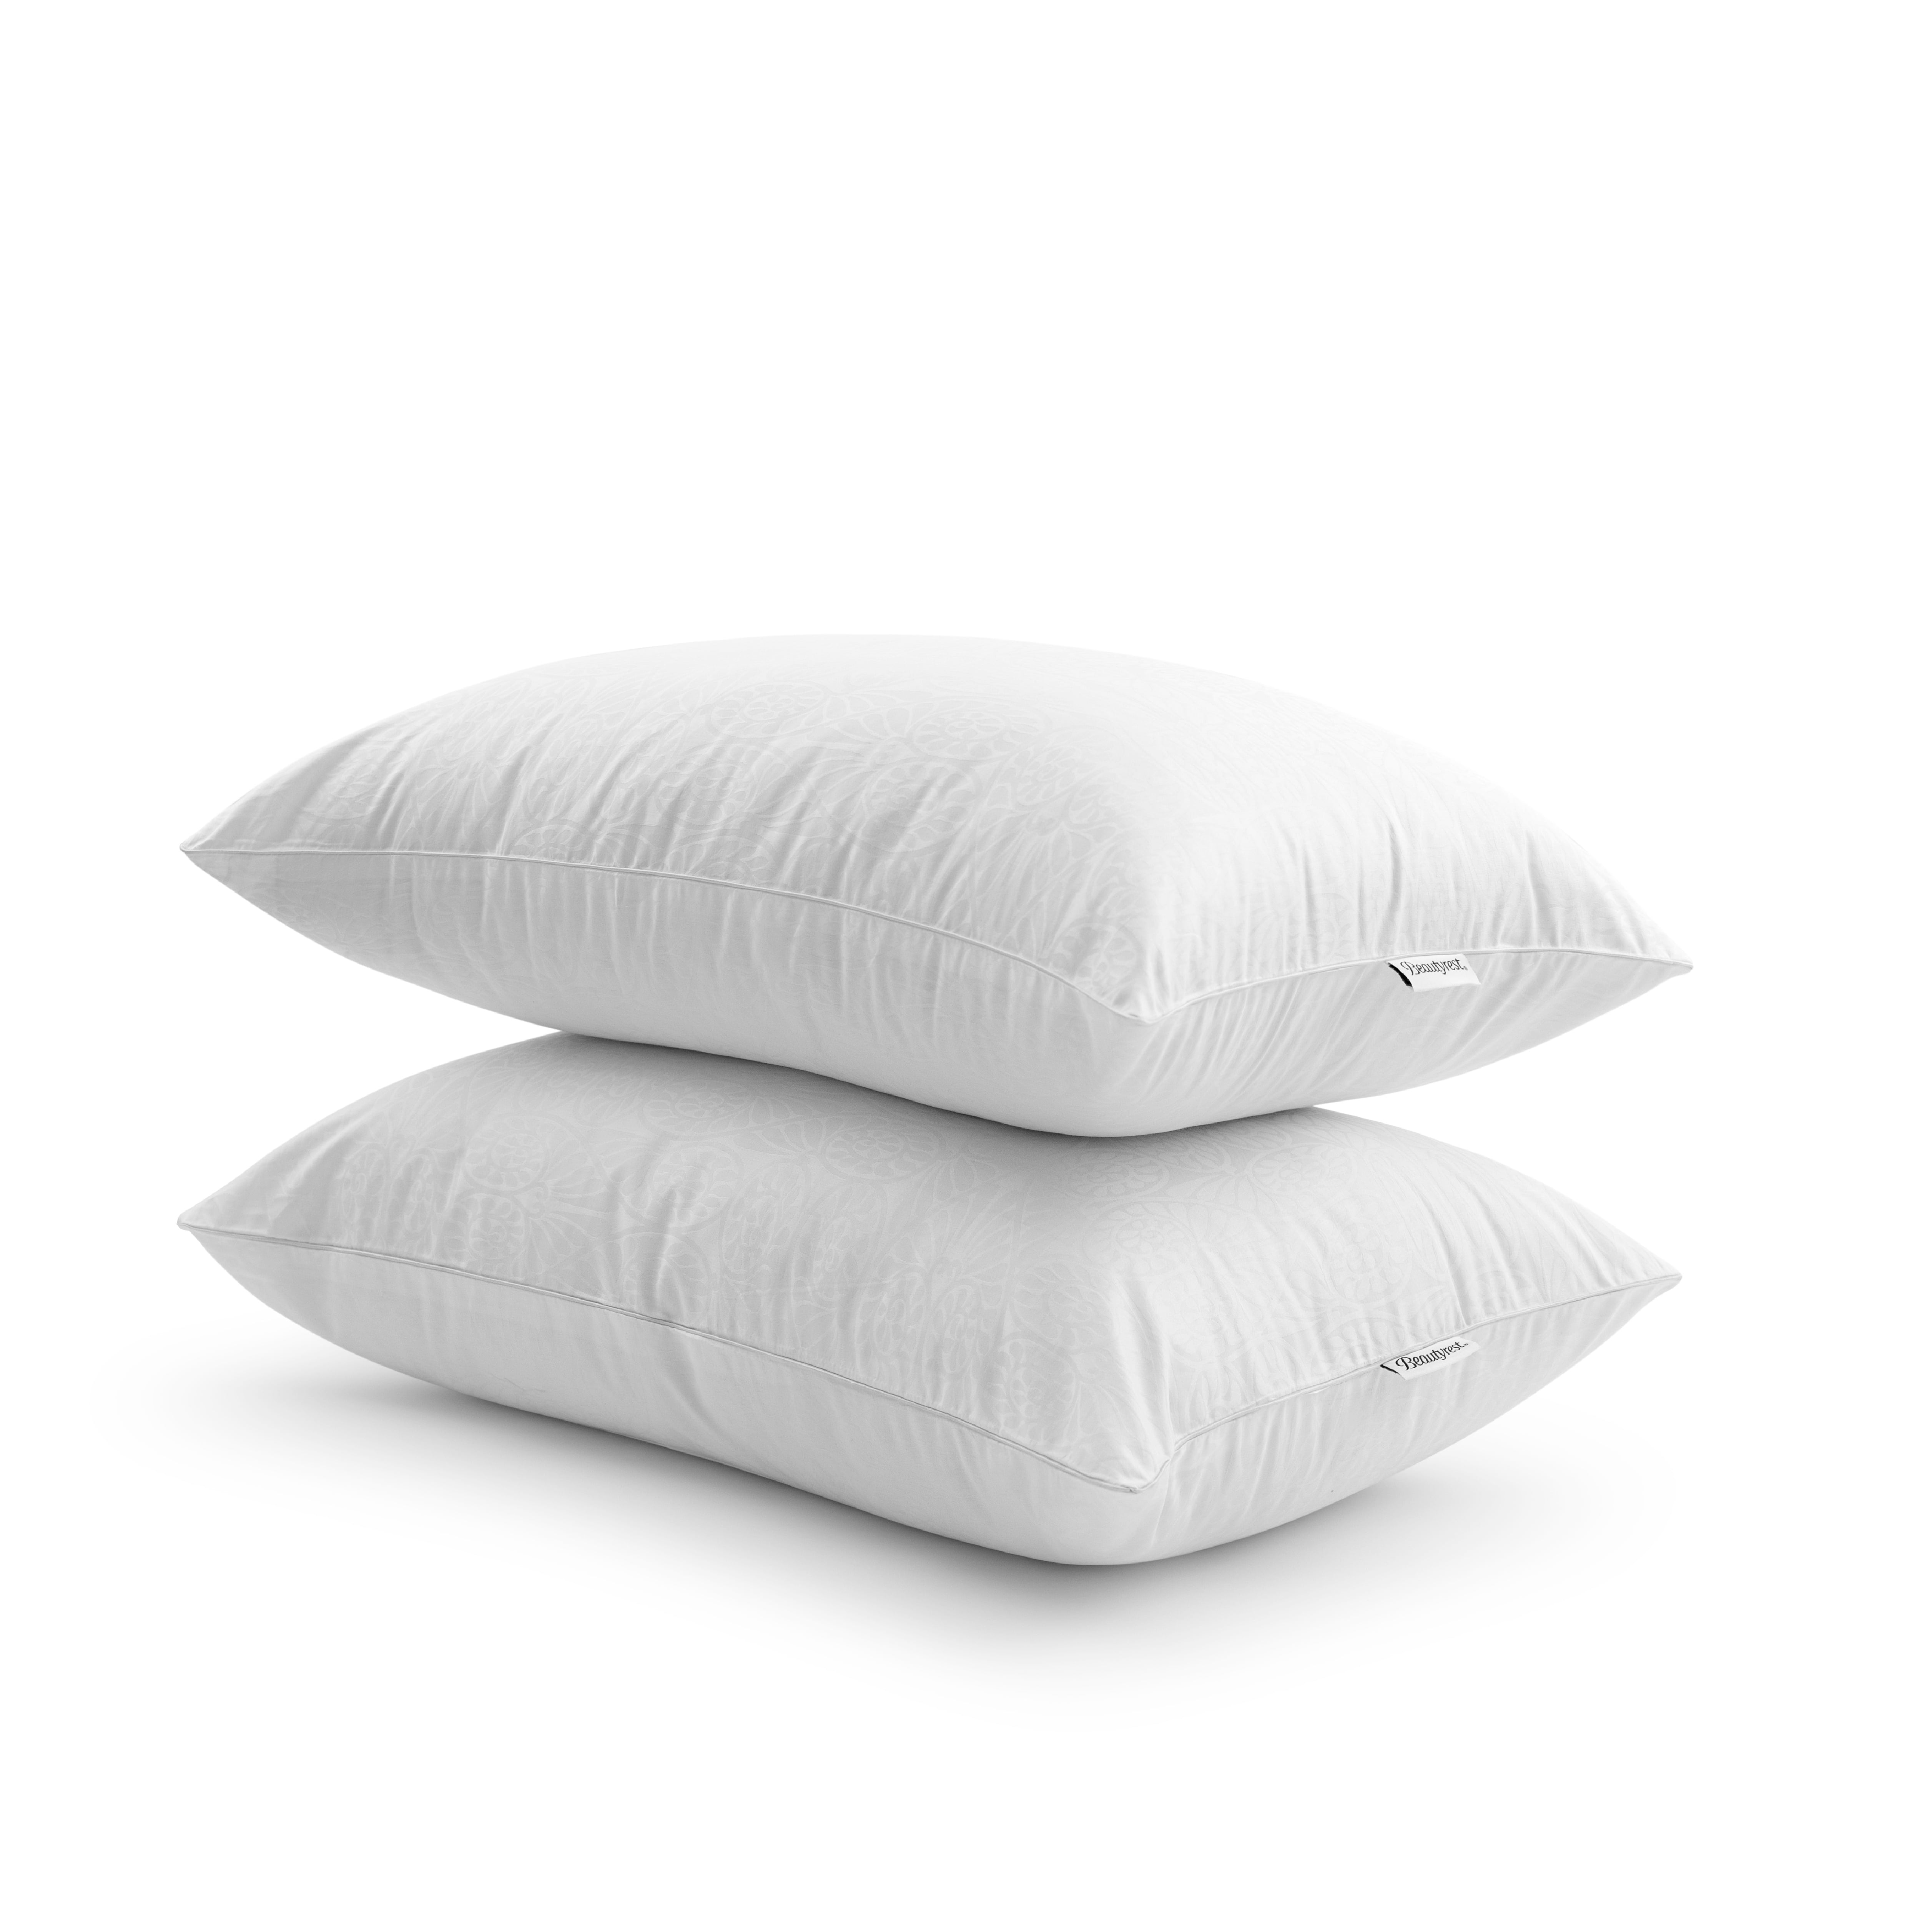 Bellissimo Premium Luxury Hotel Bed Pillow, 2 Pack (Assorted Sizes)